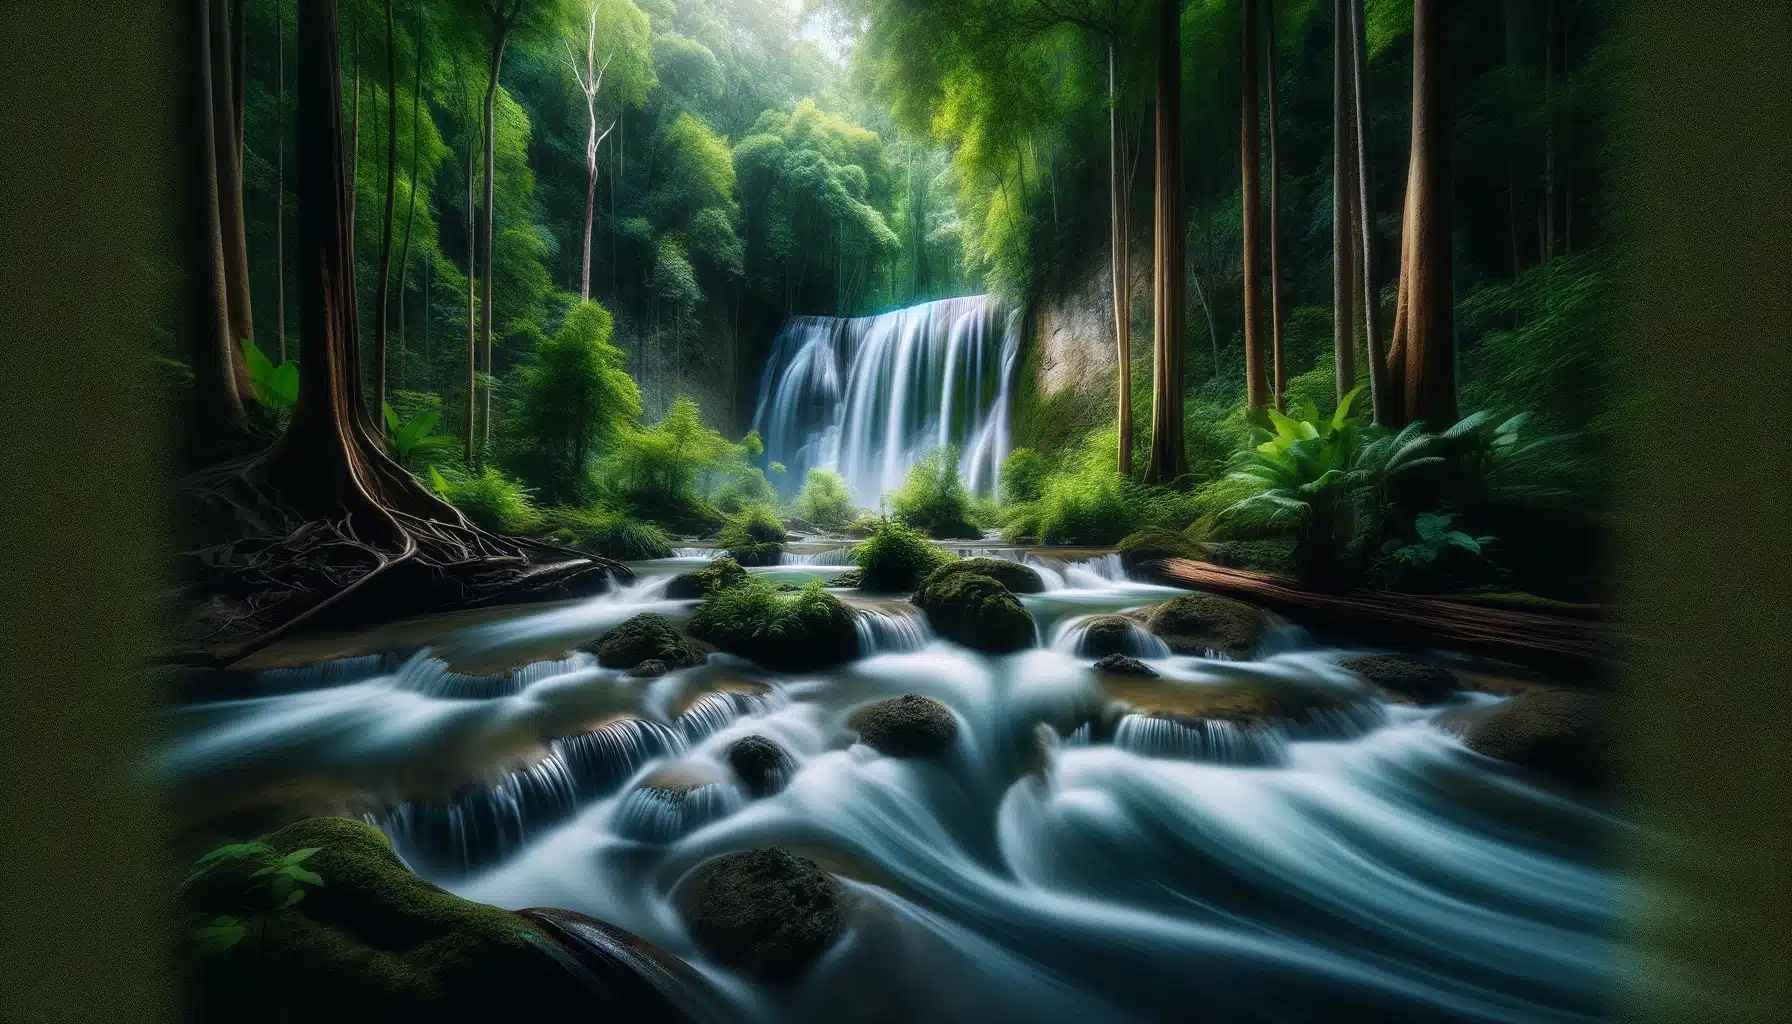 Waterfall in a lush forest with transit dim effect, creating a smooth, silky water flow against a stationary background